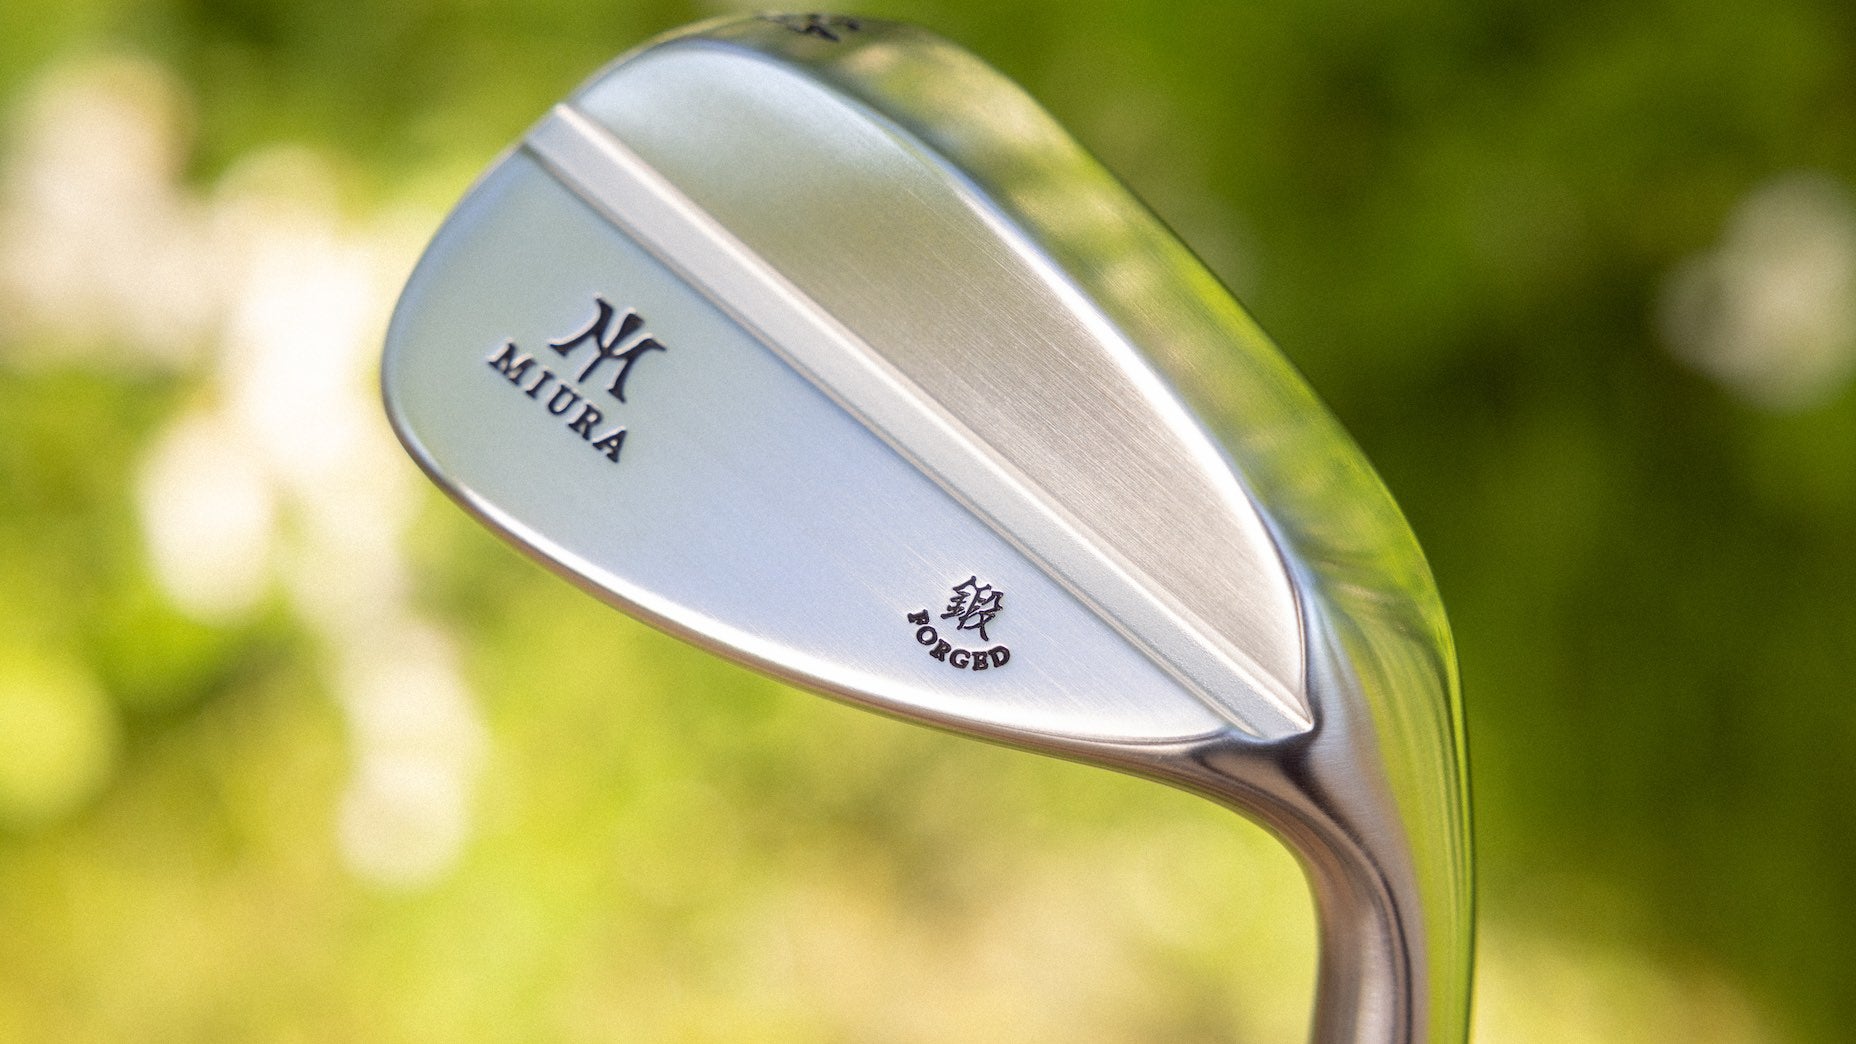 miura forged wedge series